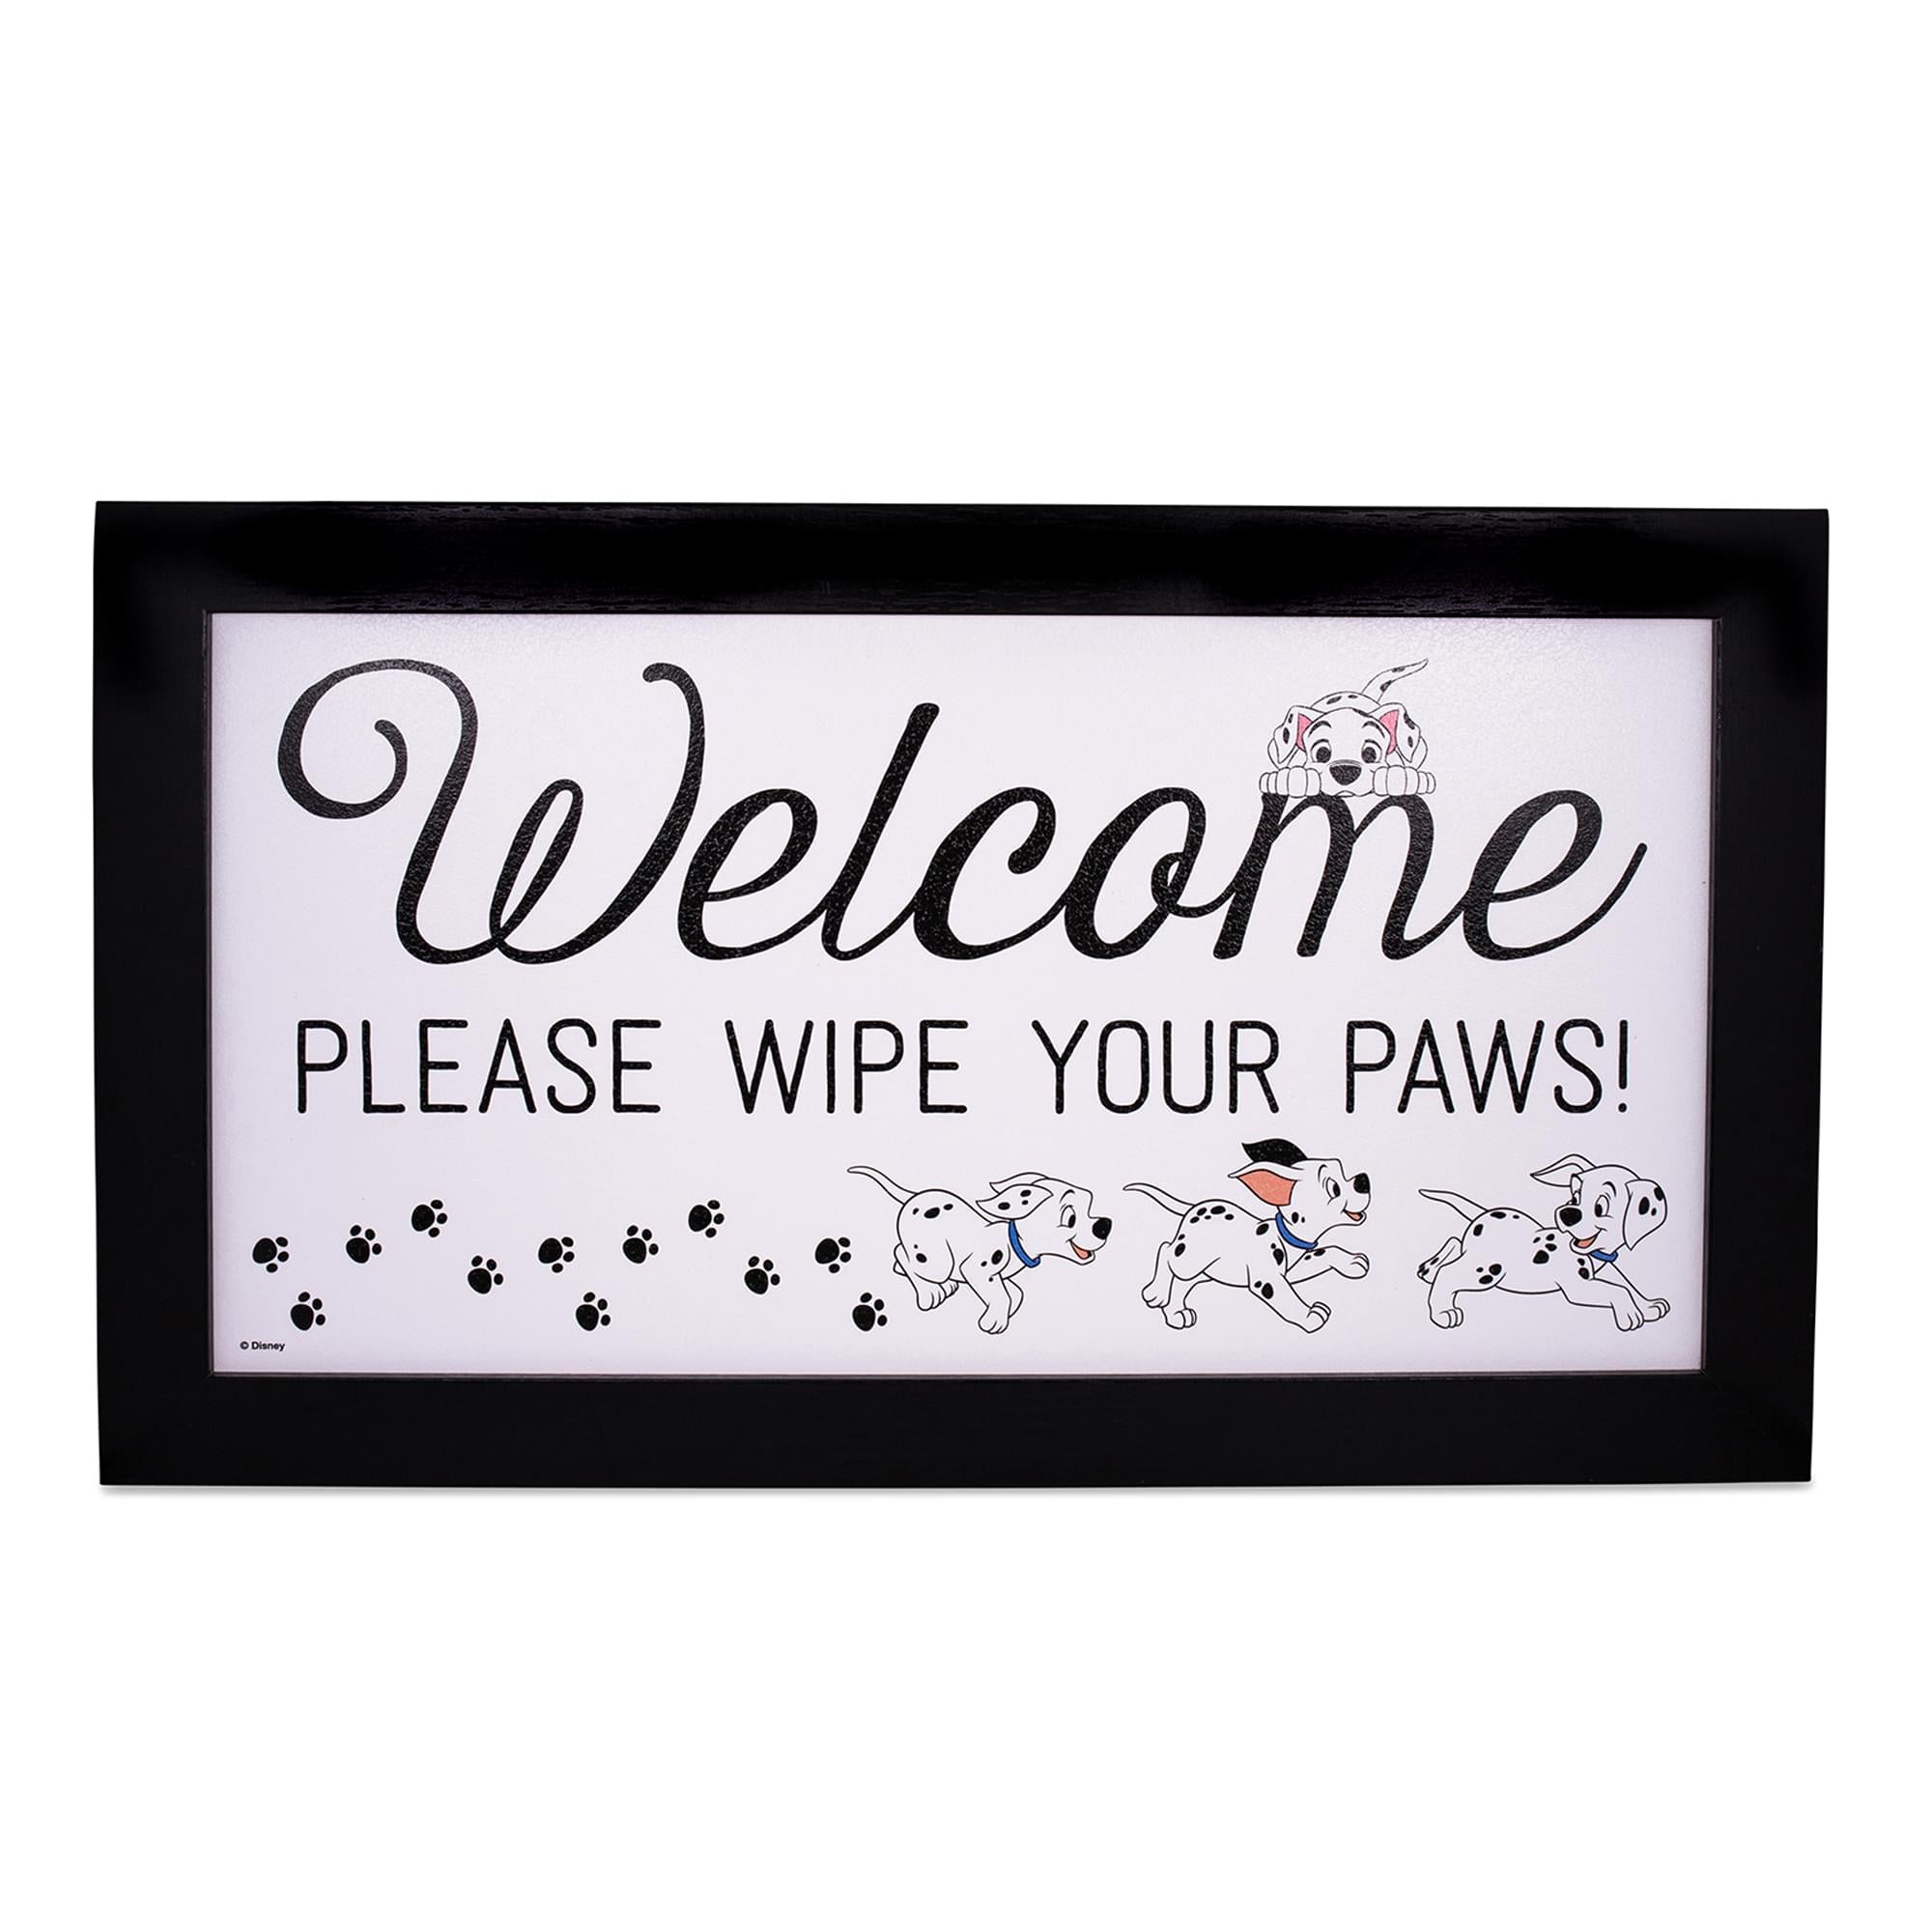 Disney 101 Dalmatians Wipe Your Paws Hanging Sign Gel Coat Framed Wall Art